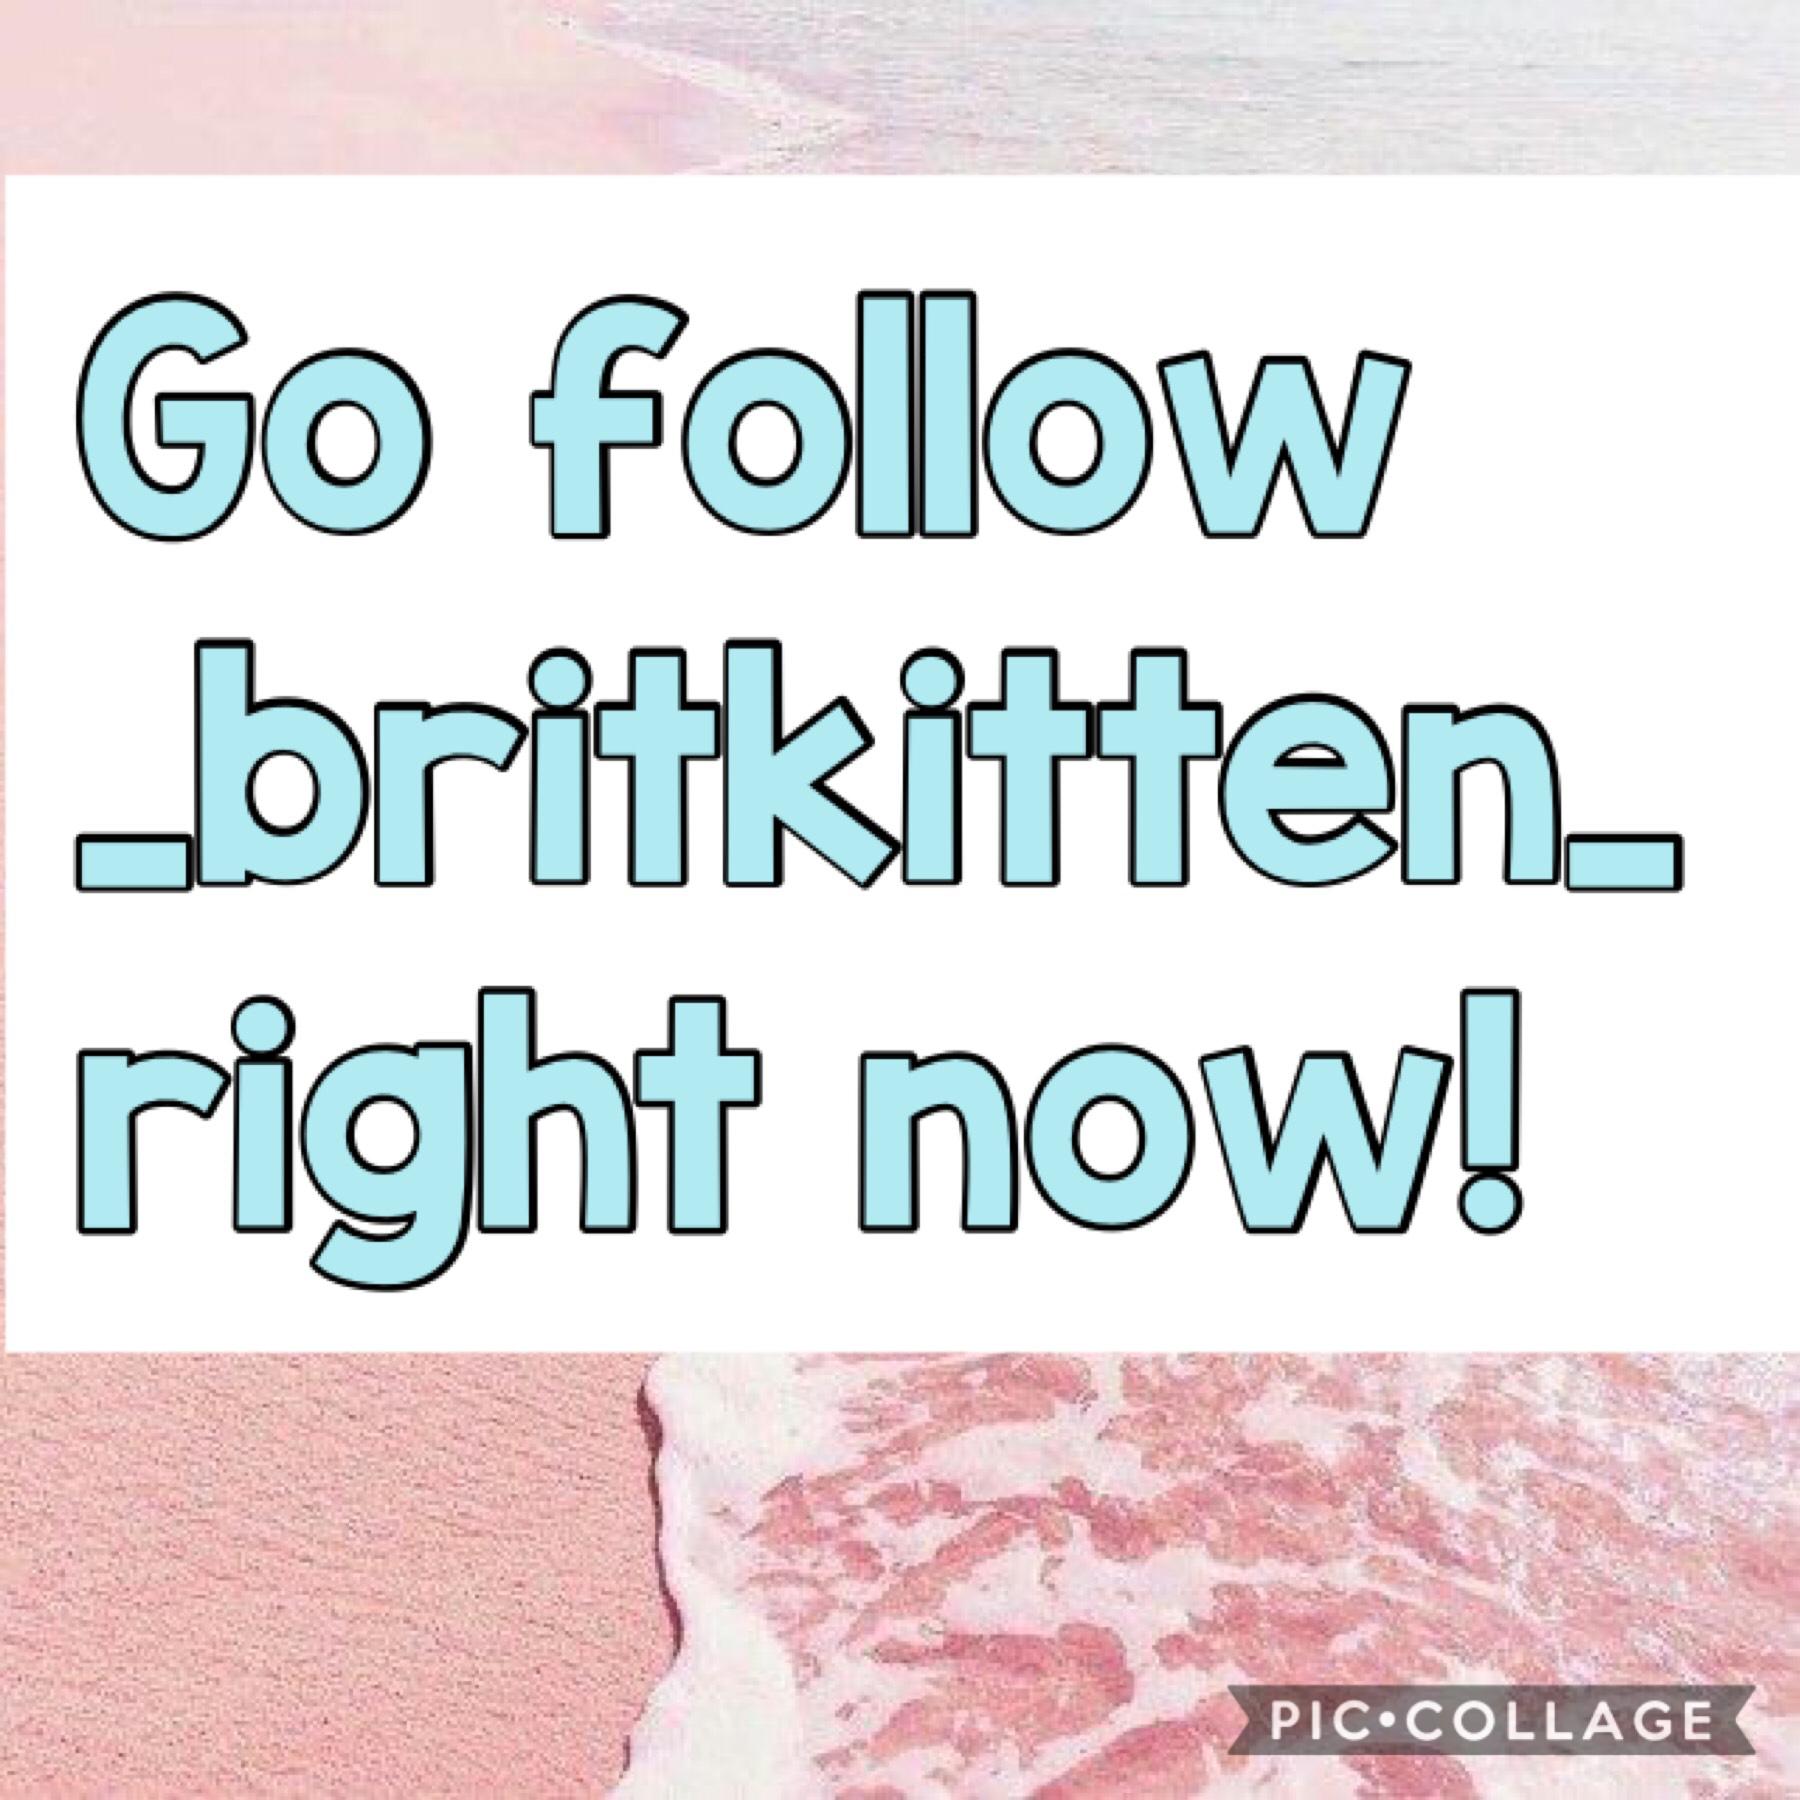 Follow her right now!